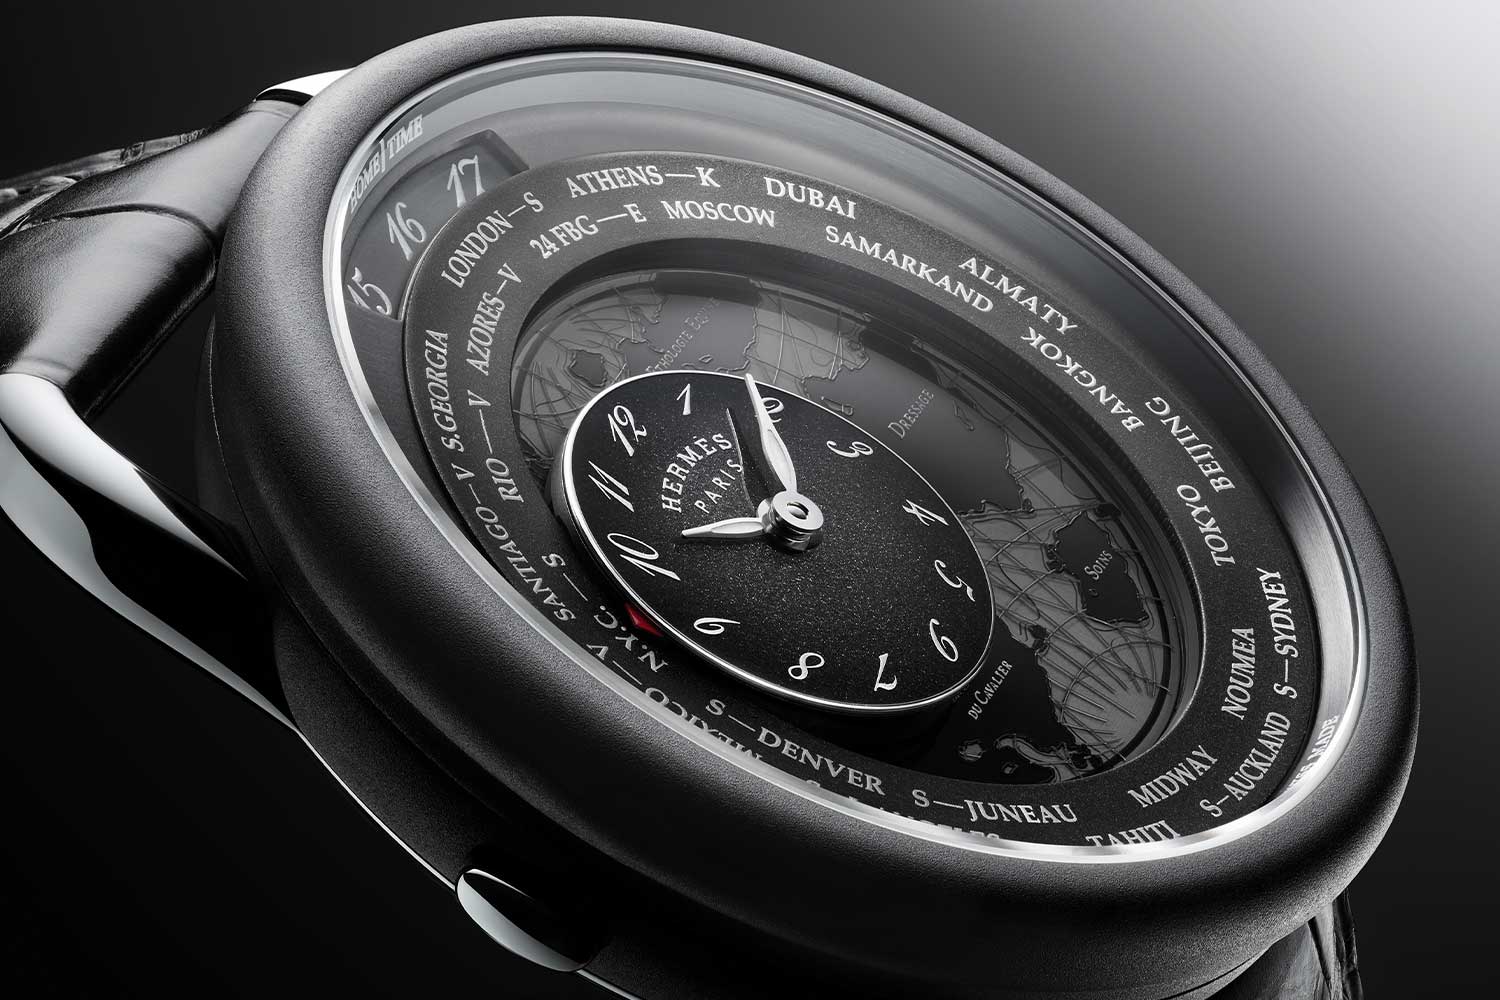 The subdial of the Hermès Arceau Le Temps Voyageur can be adjusted, using a pusher on the left side of the case, to make it move across the 24-cities listed to display your desired local time; home time is displayed using the aperture at 12 o'clock; home and local time must be synchronised first before local time can be displayed by using the crown on the right side (©JoelVonAllmen)